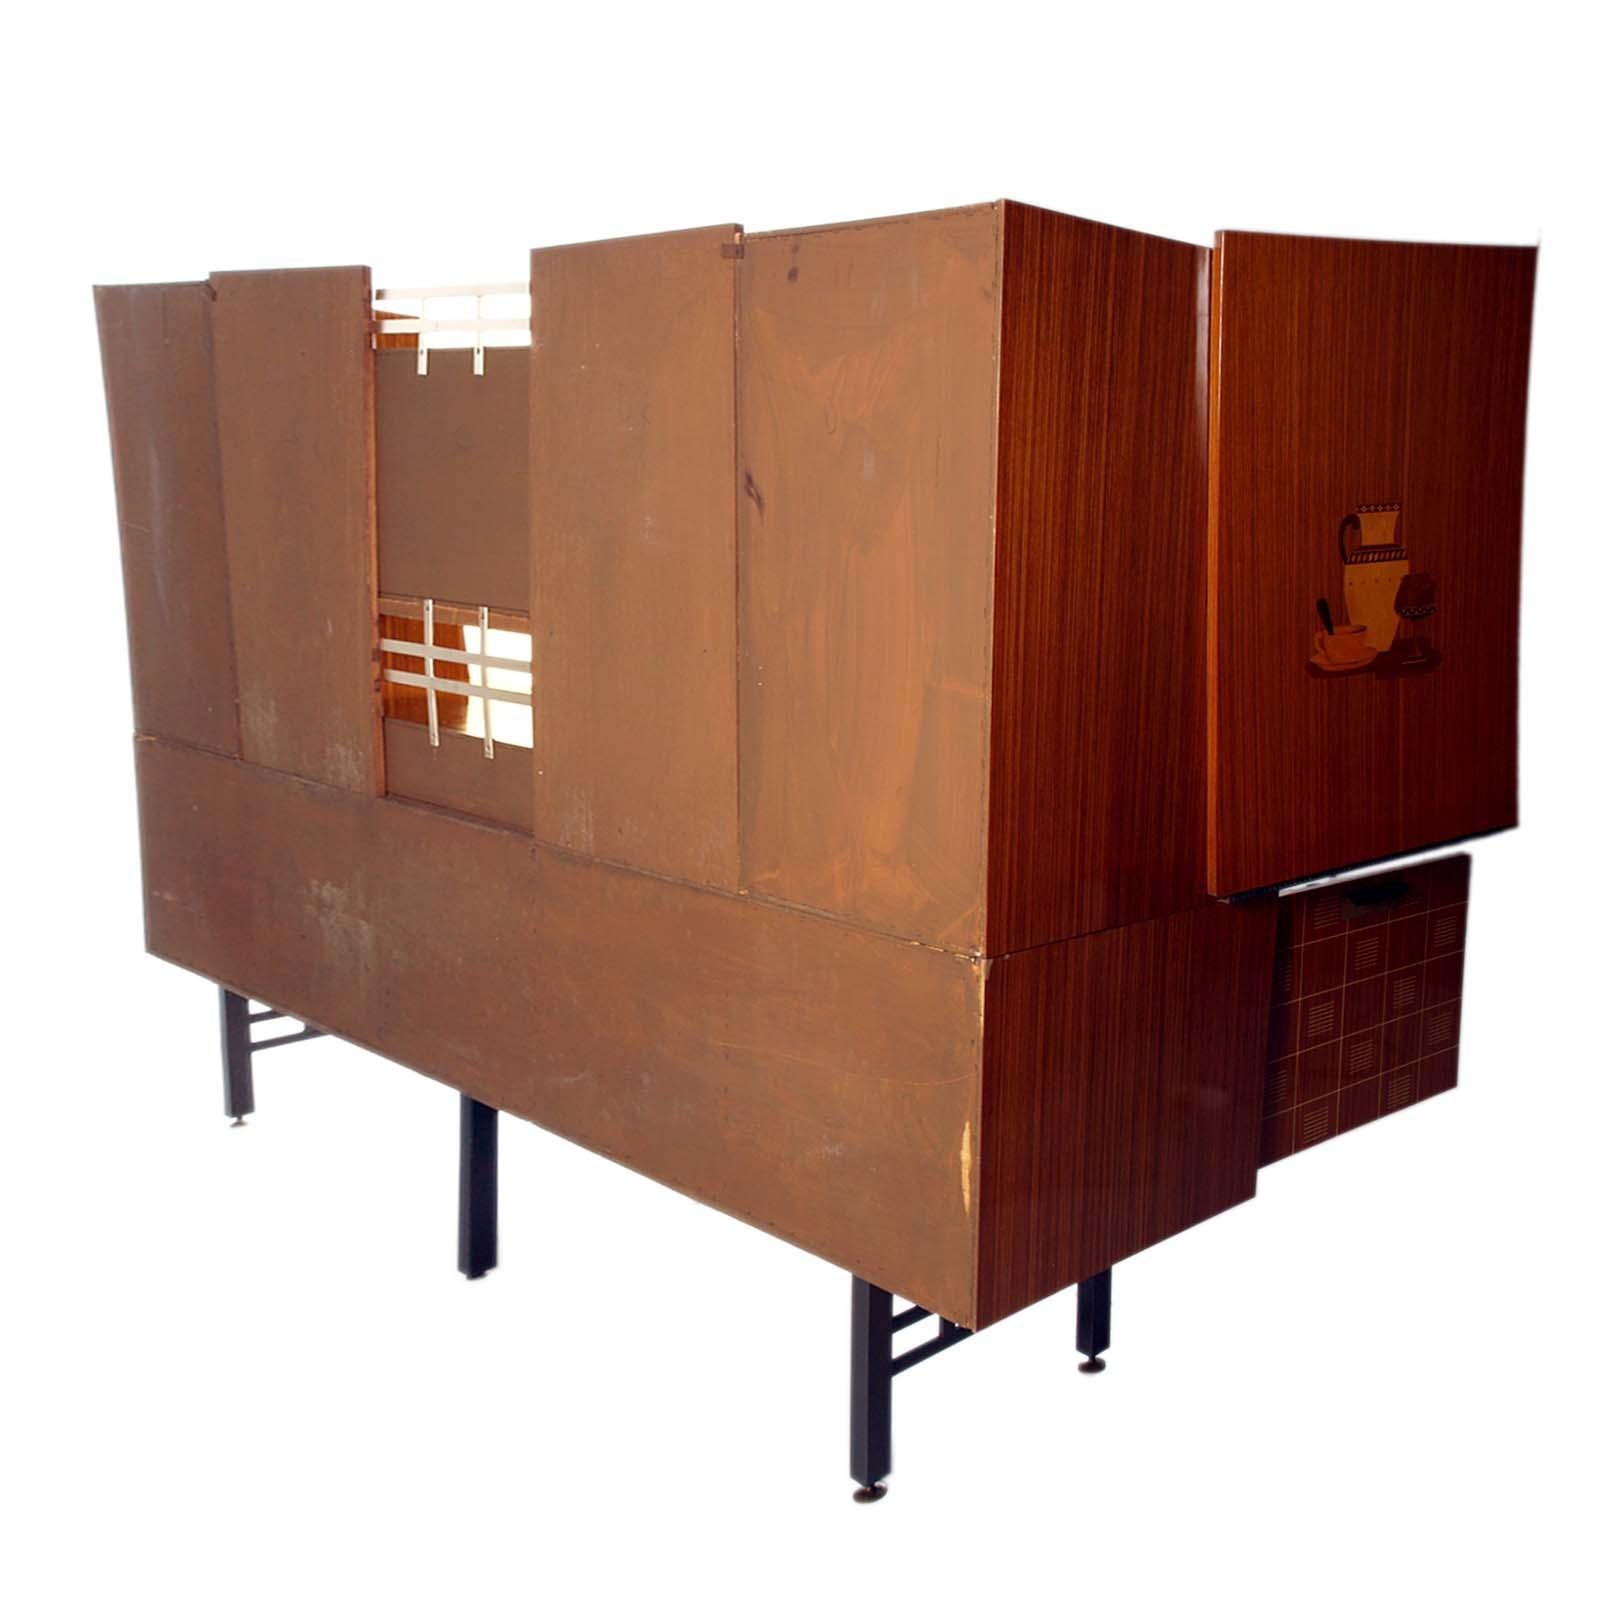 1960s Sideboard La Permanente Mobili Cantù in Veneered Rosewood with Maple Inlay For Sale 2